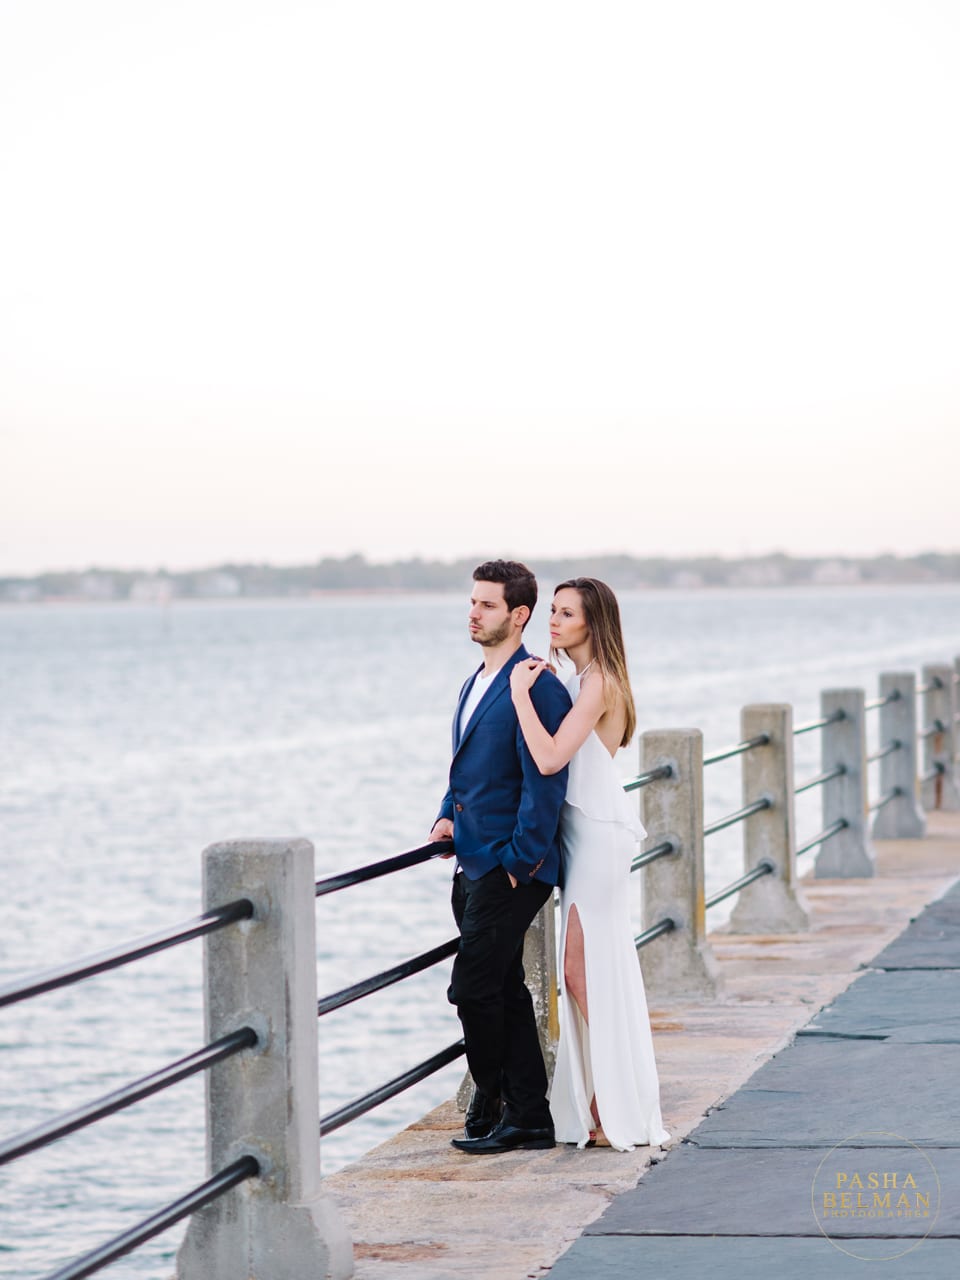 Downtown Charleston Engagement Pictures |  Engagement Photos and Ideas in Charleston SC by Pasha Belman